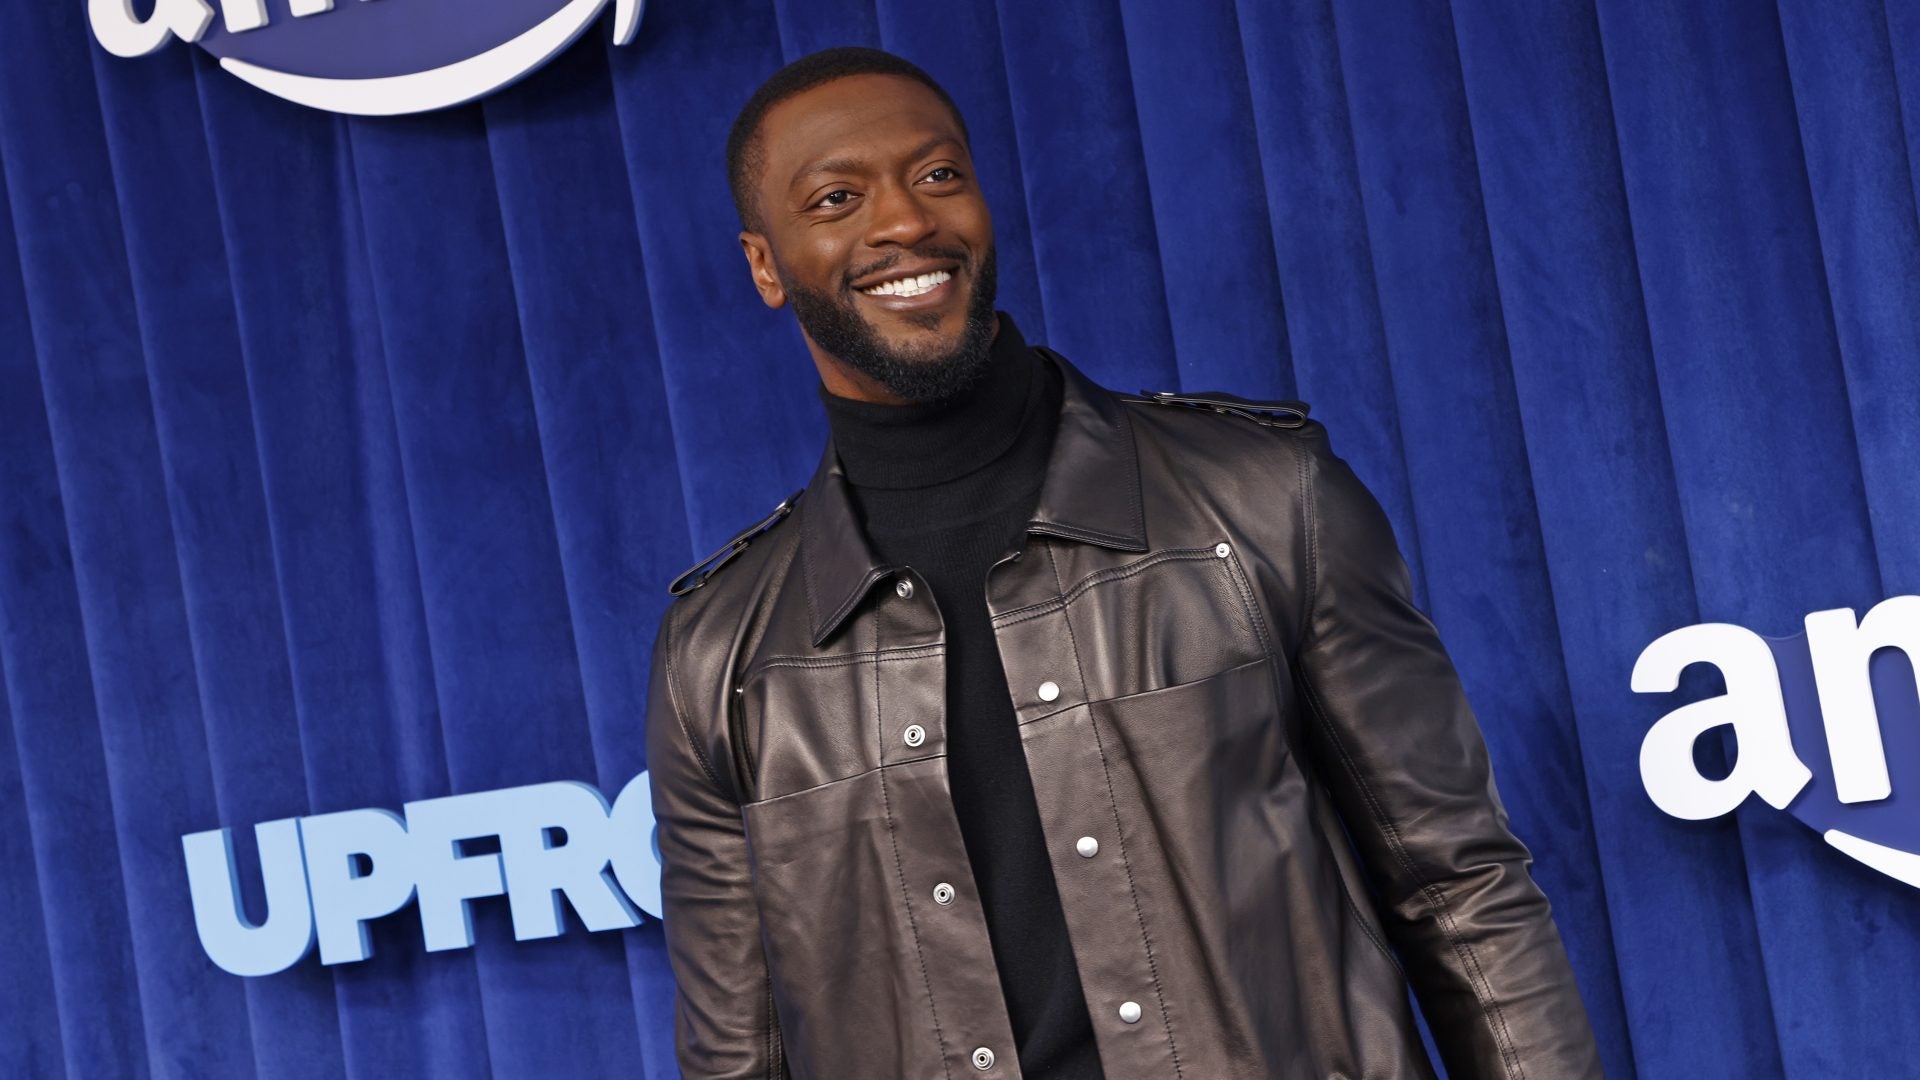 WATCH: Aldis Hodge To Star As Iconic Black Detective In New Series, ‘Cross’